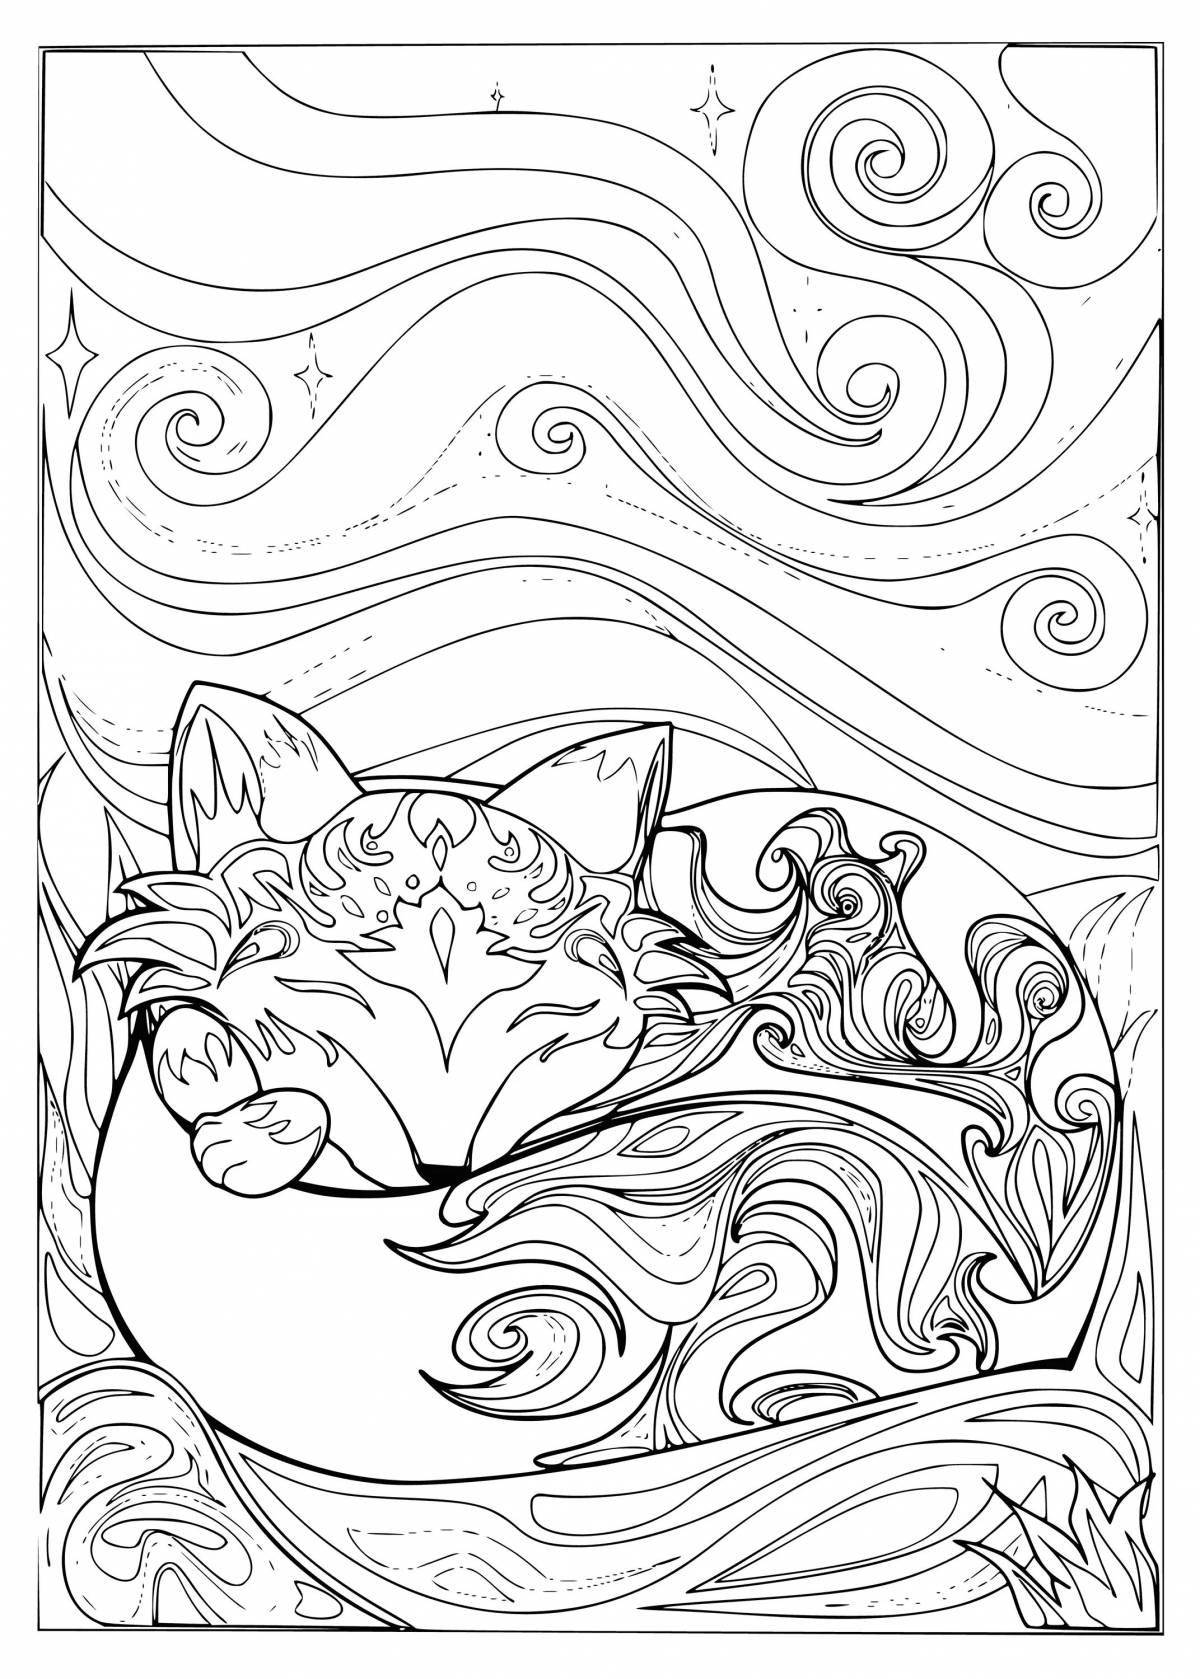 Delicate fox coloring for adults